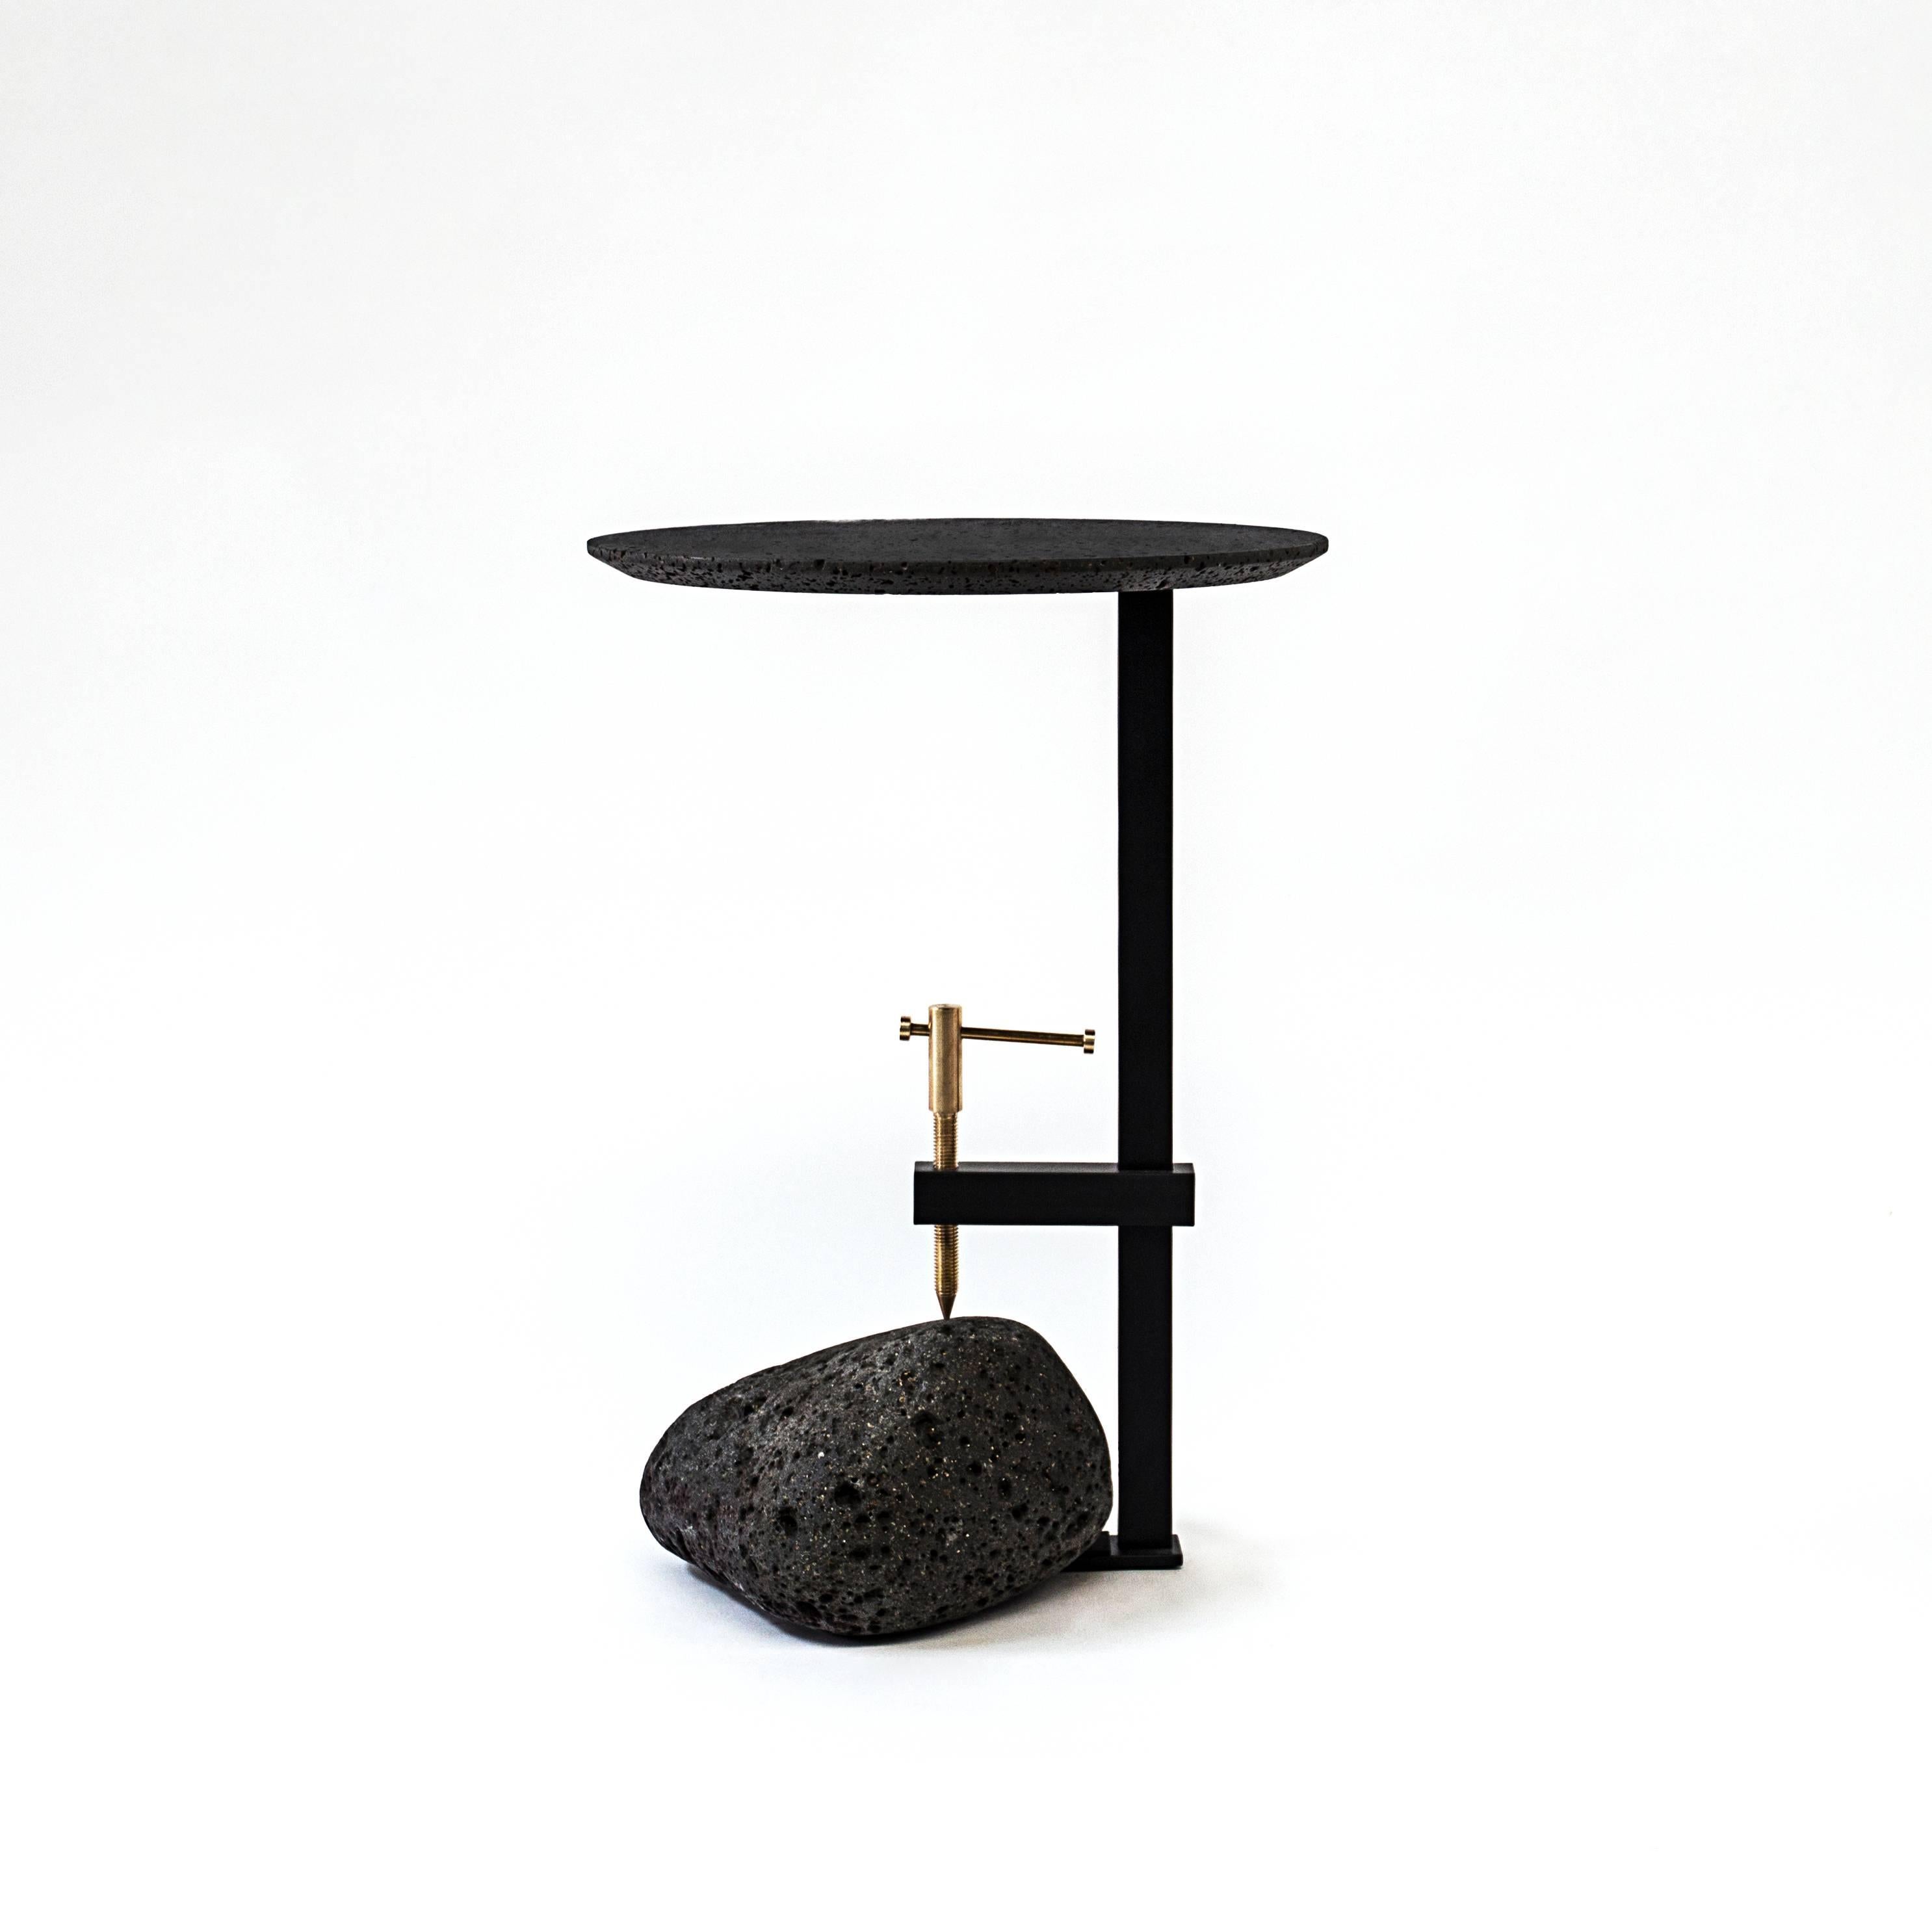 Studio Buzao
Black lava stone and concrete table designed by Cantonese studio Buzao

Black lava stone
50 x 33 x 33 cm

........
“F” side table from Buzao collection is a creation by the young designers of Studio Bentu based in Guangzhou.

Their